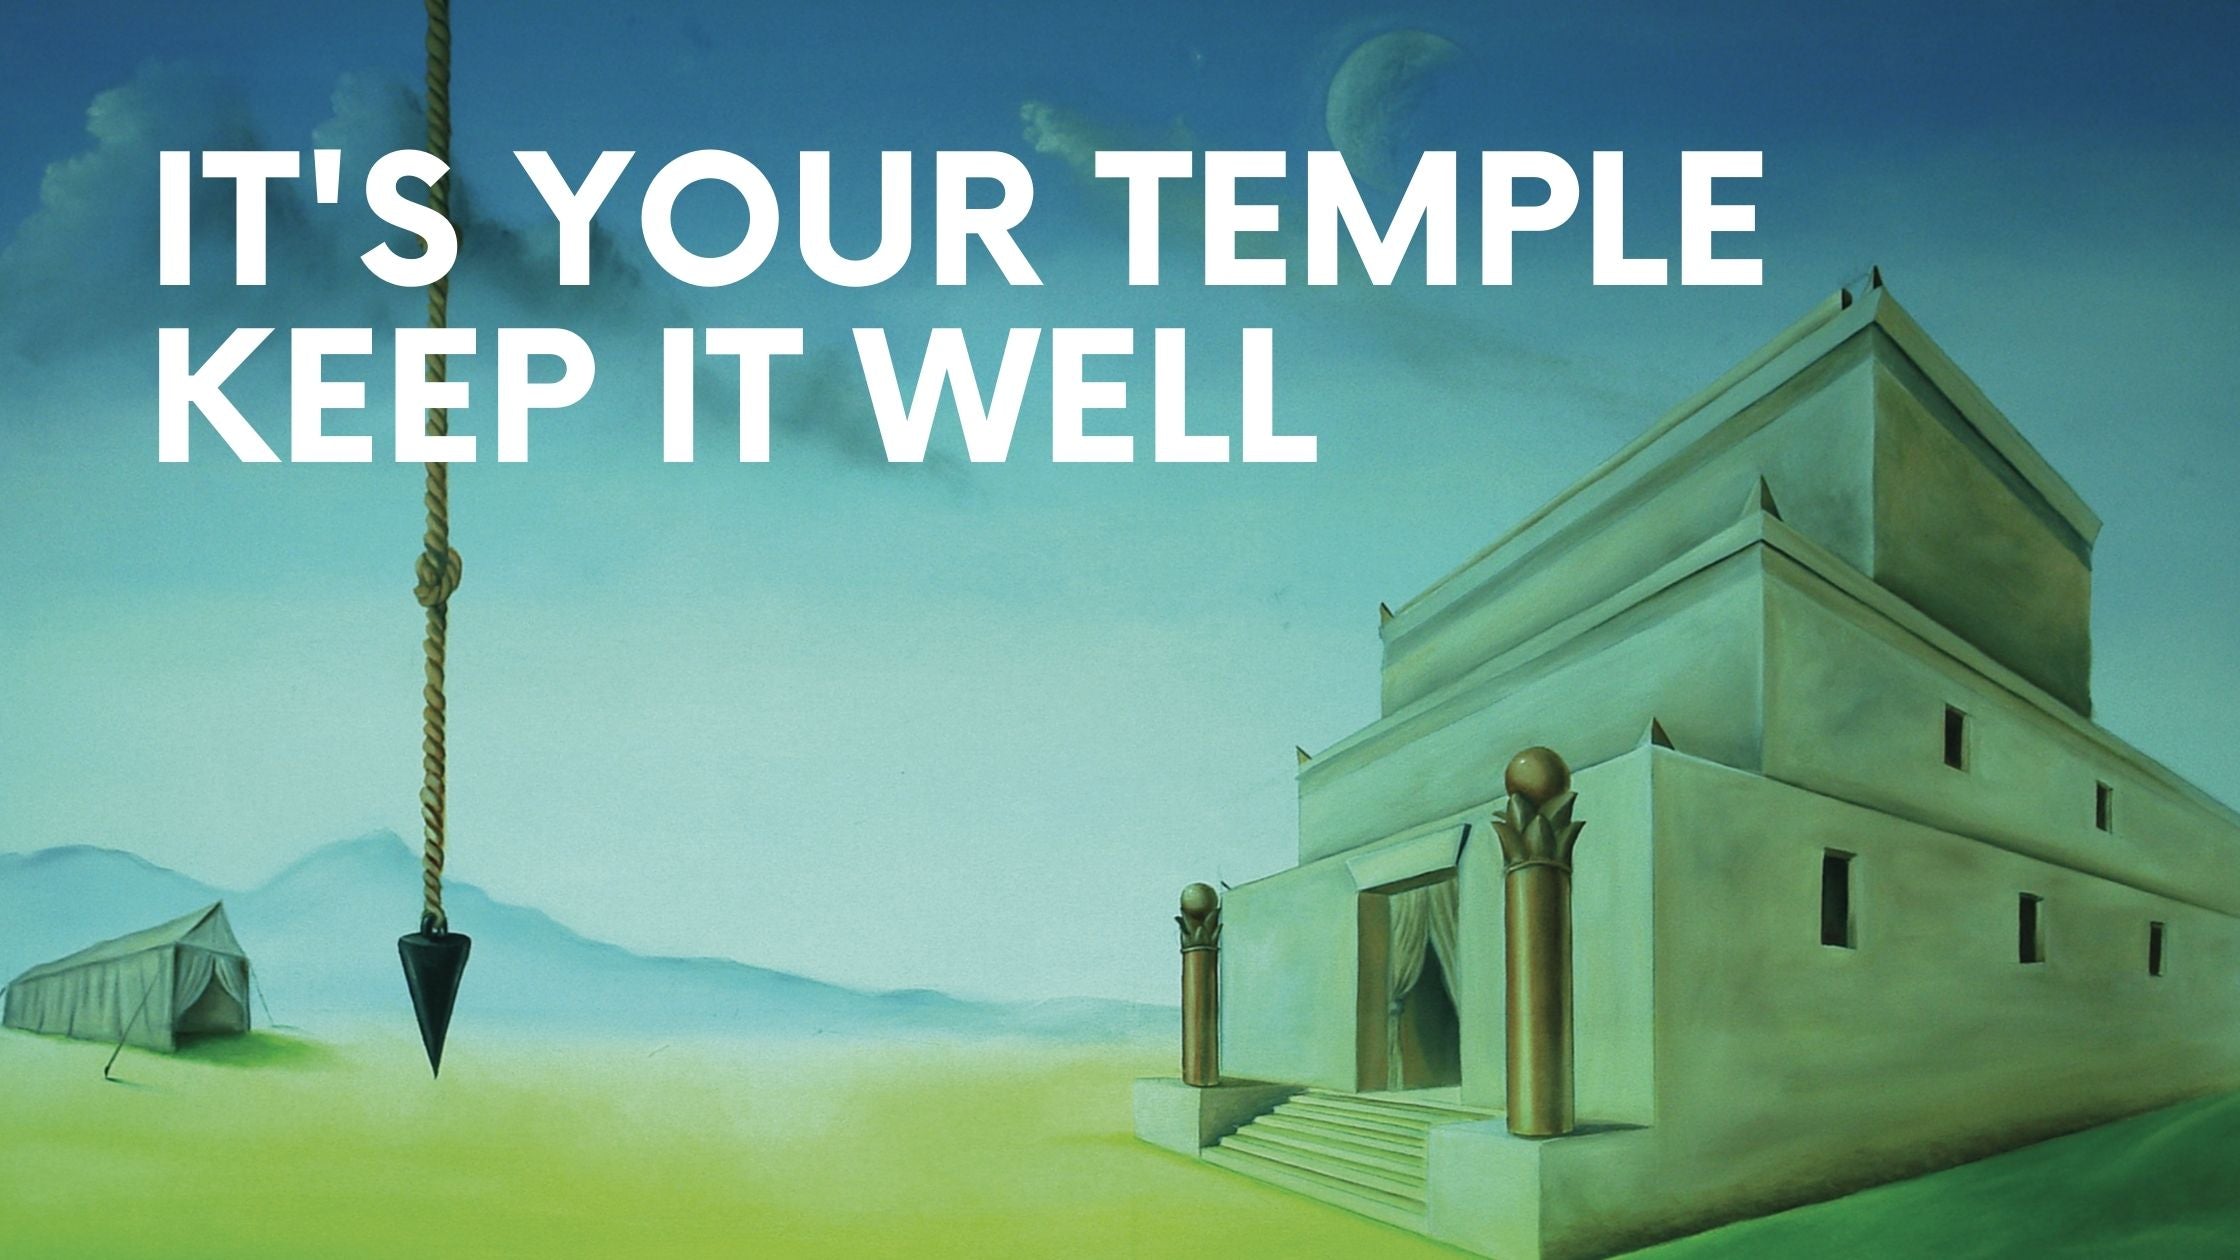 It's your Temple, keep it well...